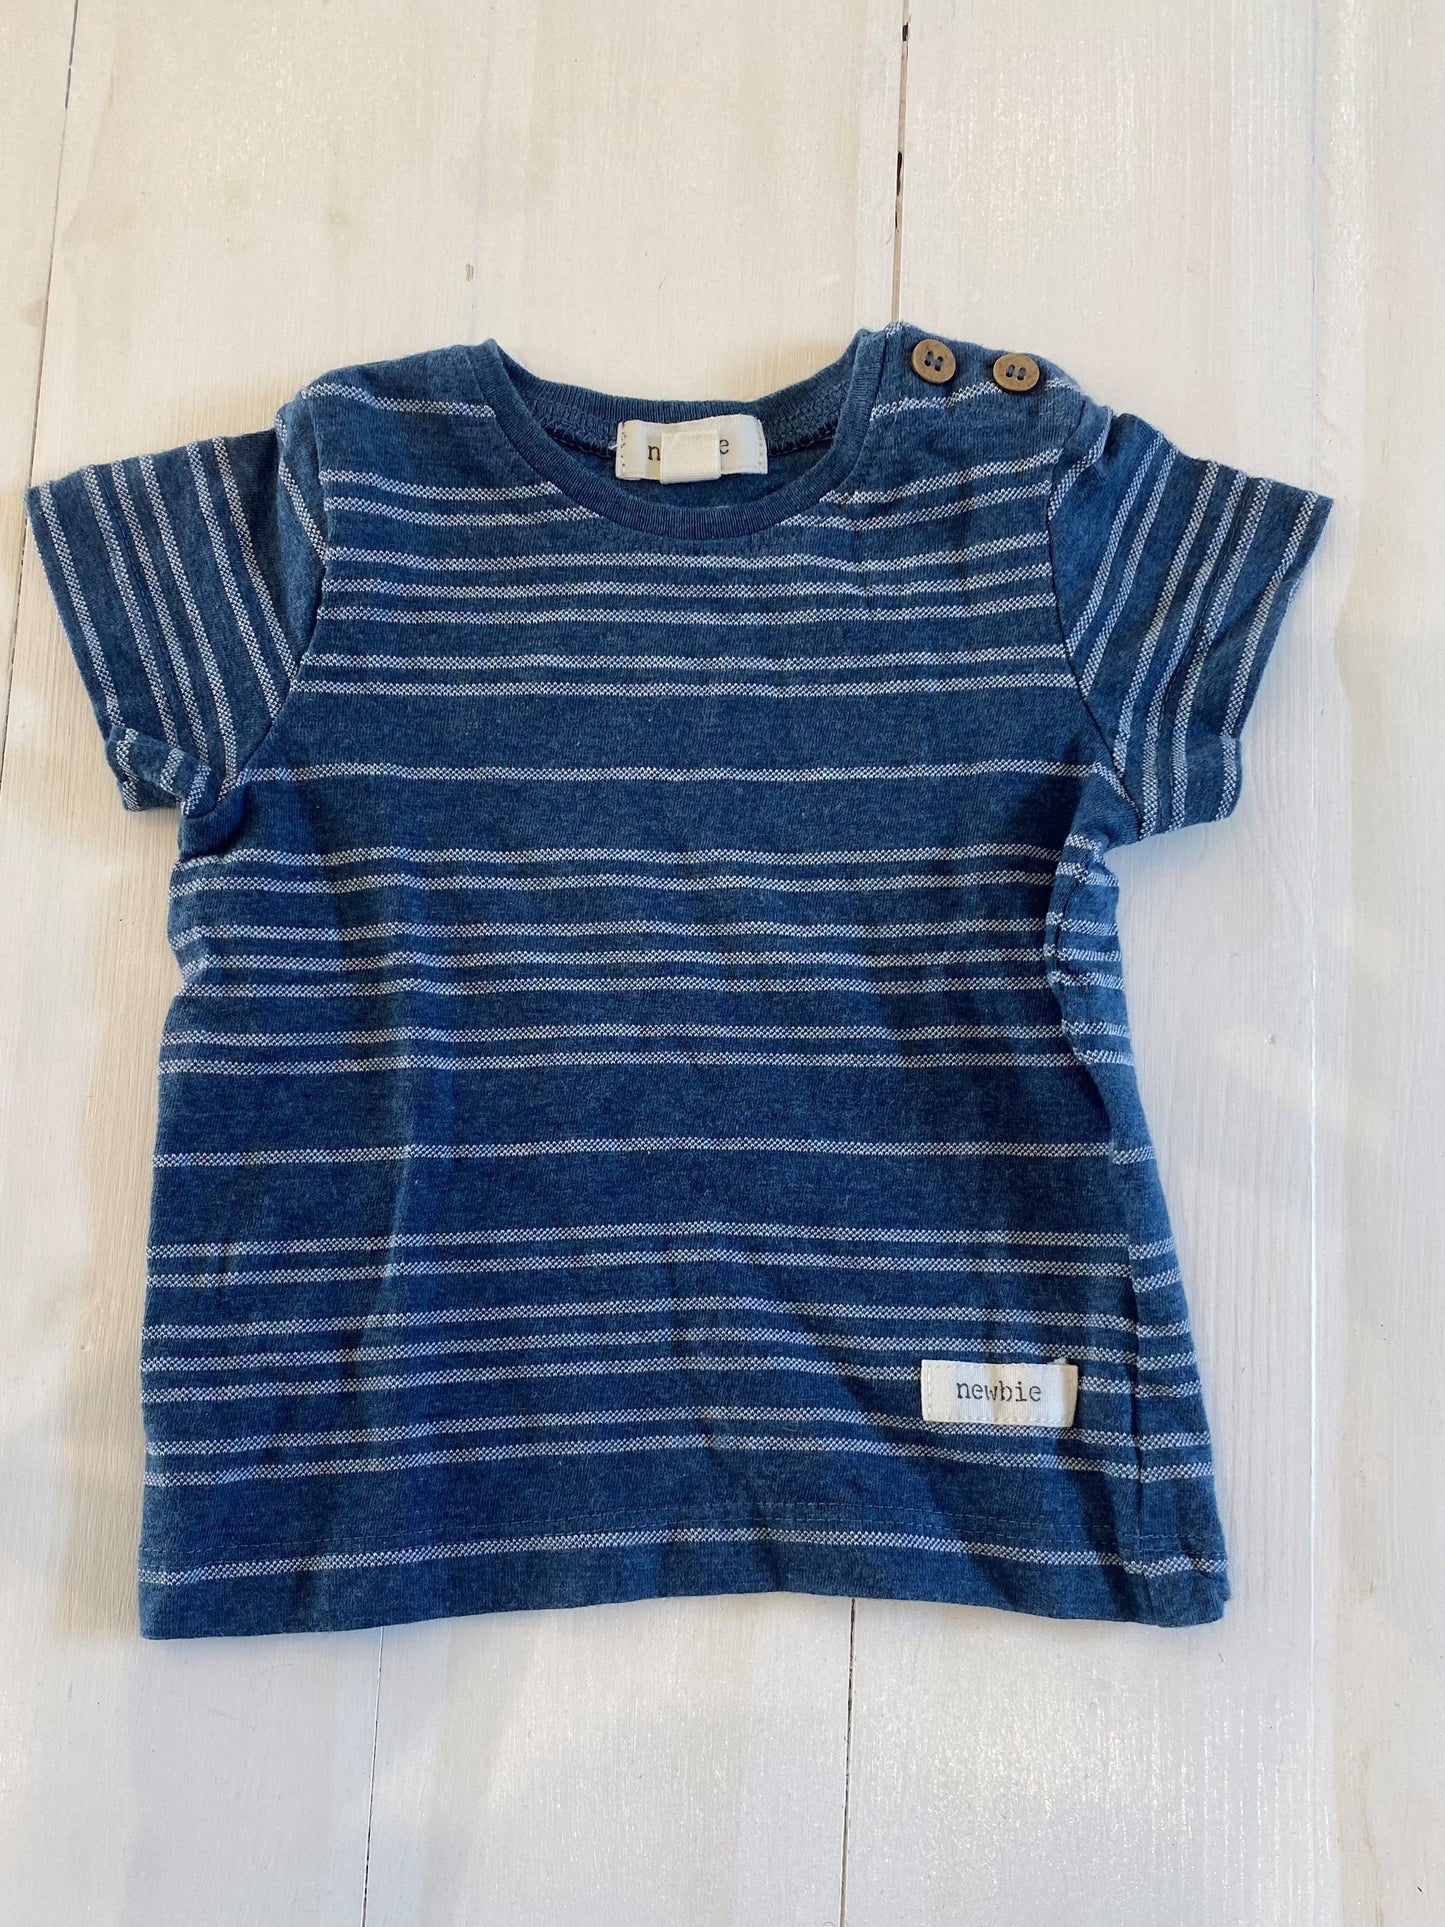 newbie pre loved t at whippersnappersonline